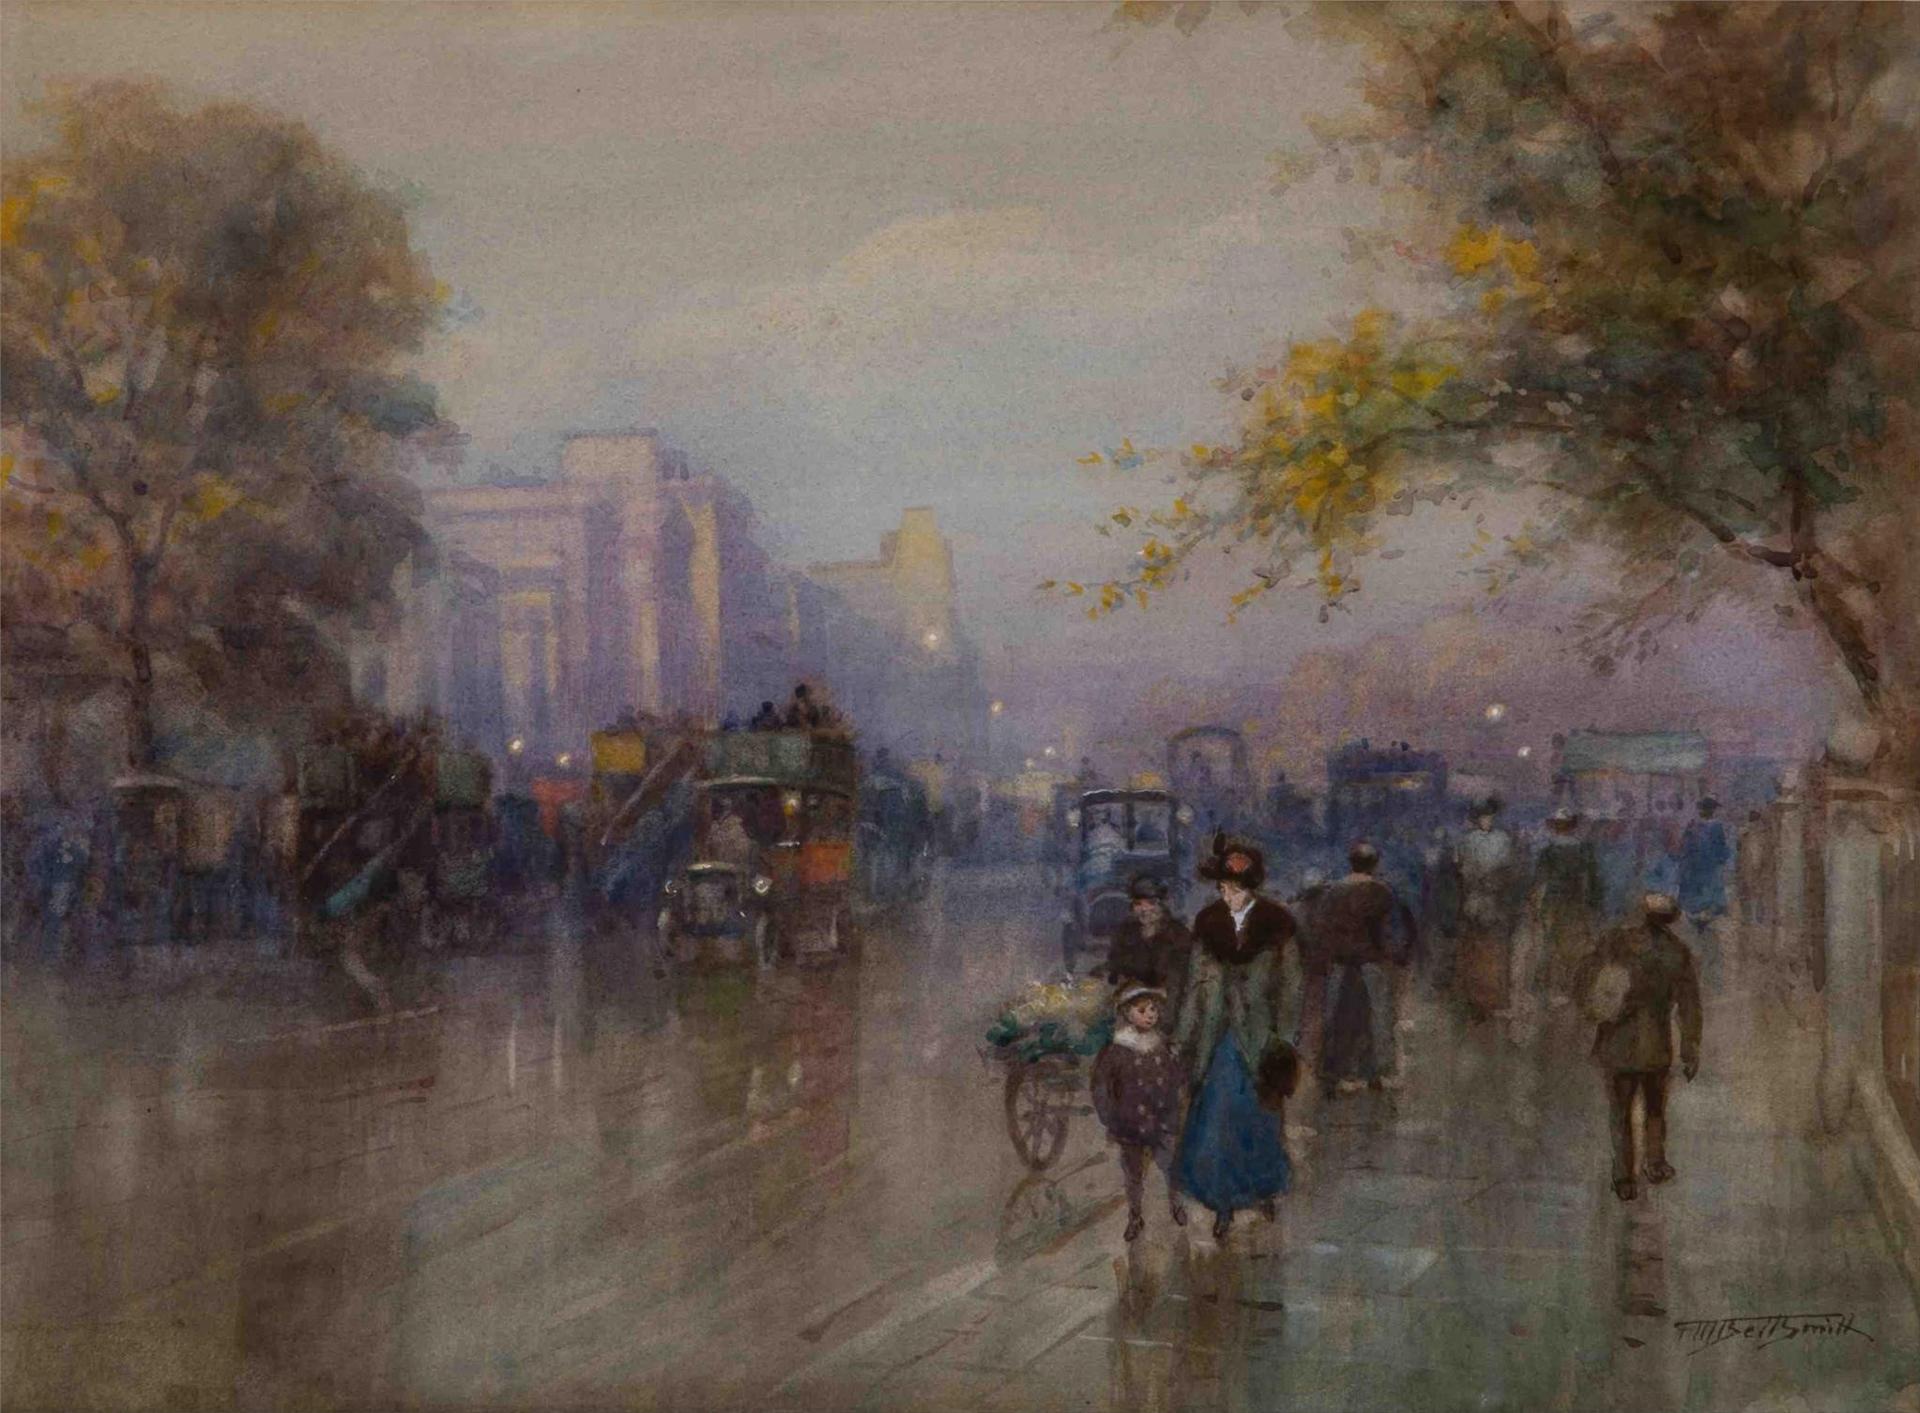 Frederic Martlett Bell-Smith (1846-1923) - Untitled (London Street,probably Hyde Park)